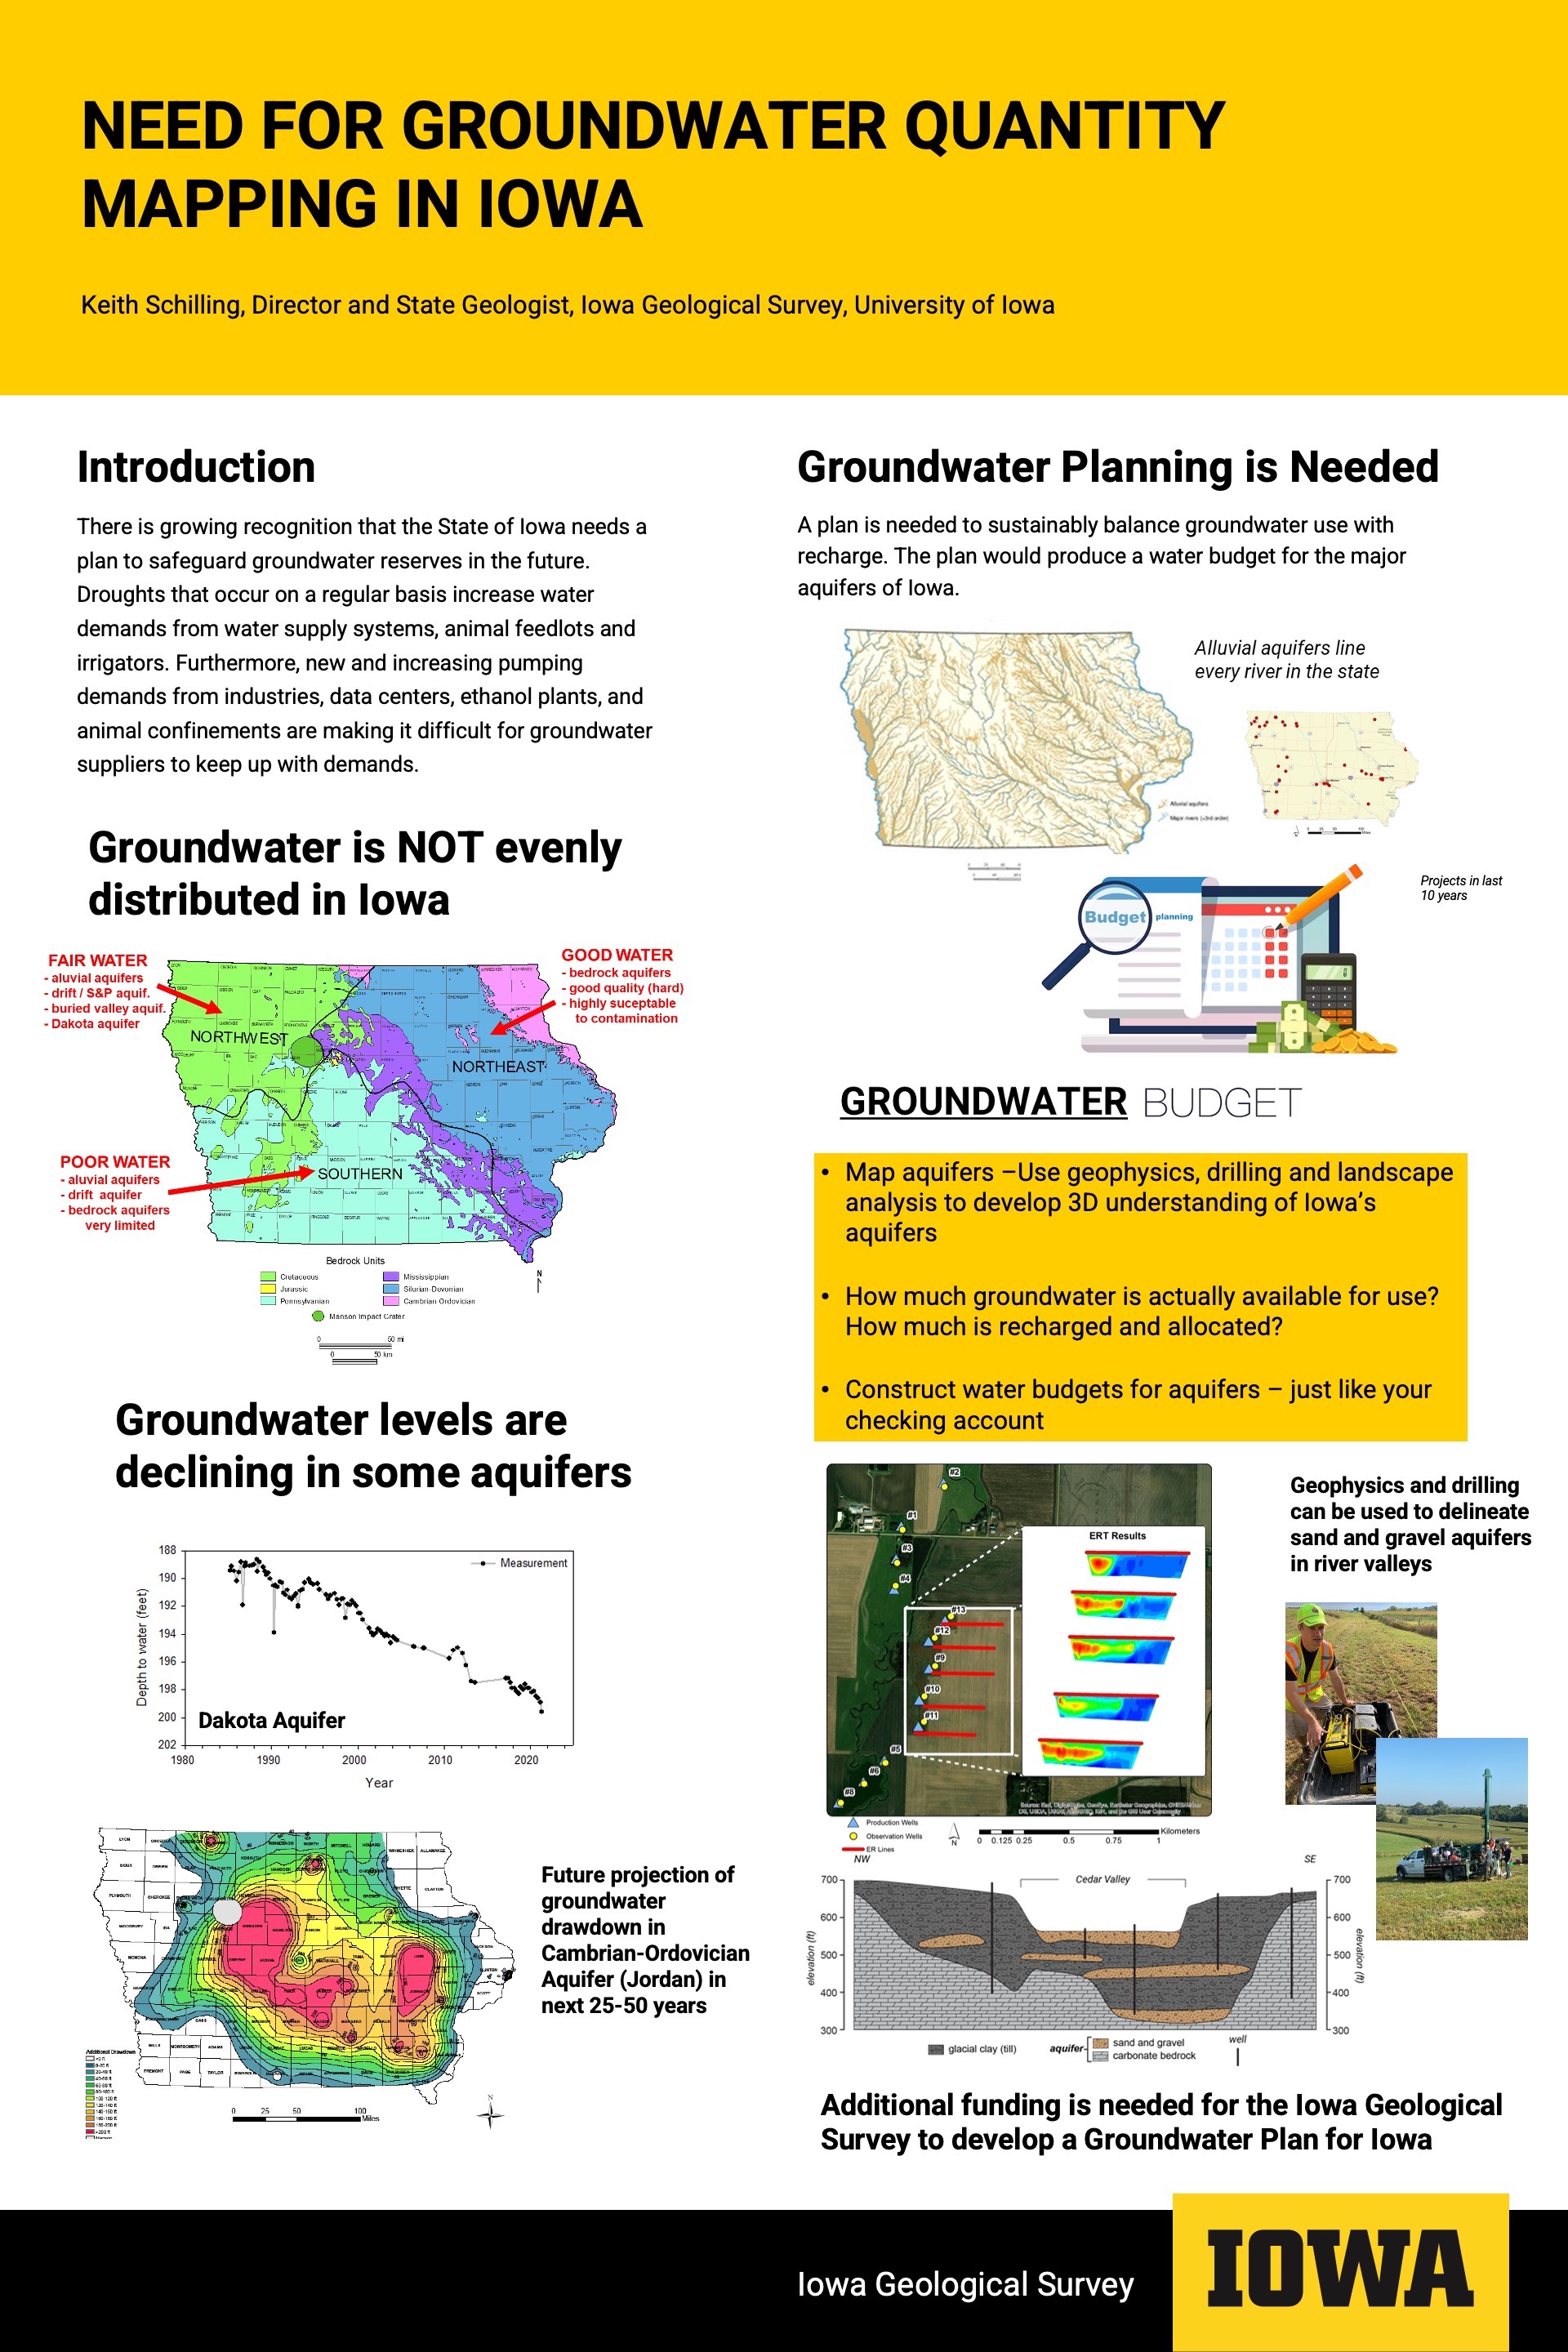 Poster describing need for groundwater quantity mapping in Iowa